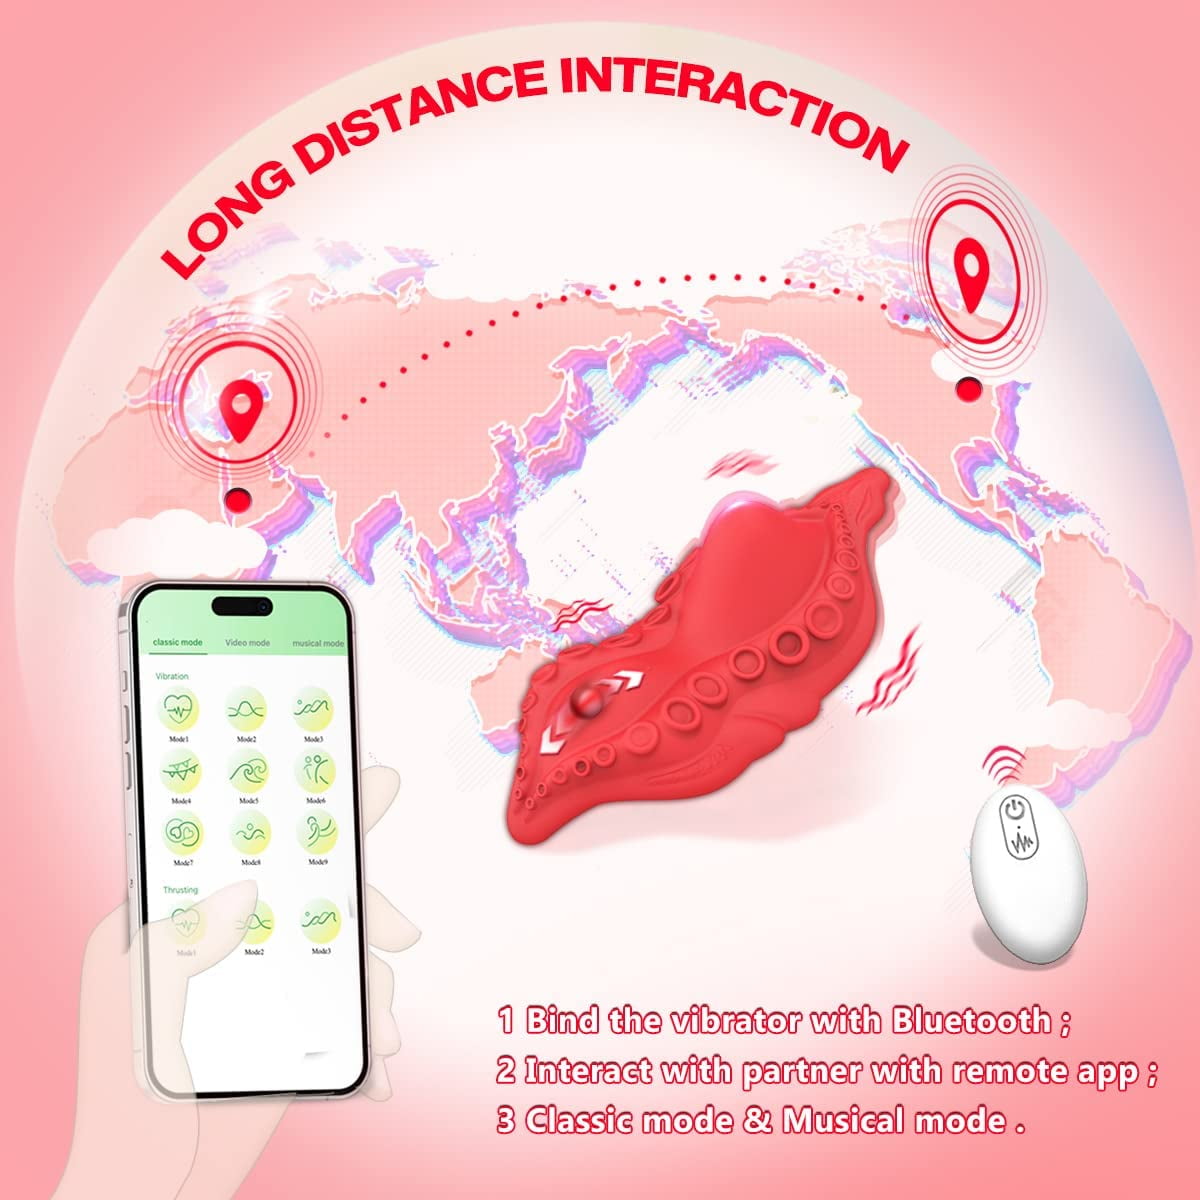 Wearable Panty Vibrator with App Control Vibrating Eggs,Rechargeable  Butterfly Vibrators Clitorals Stimulator Vibrating Panties Wearable Sex Toy  for Women (Dark Red) 